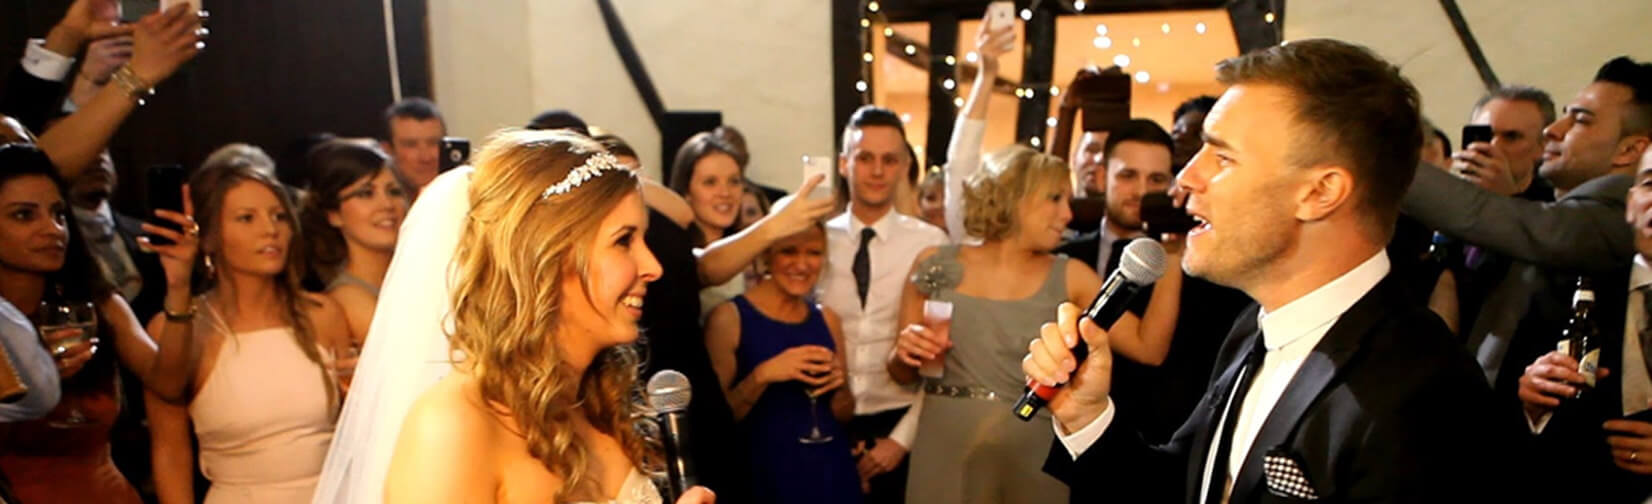 Could Gary Barlow Sing at Your Wedding?